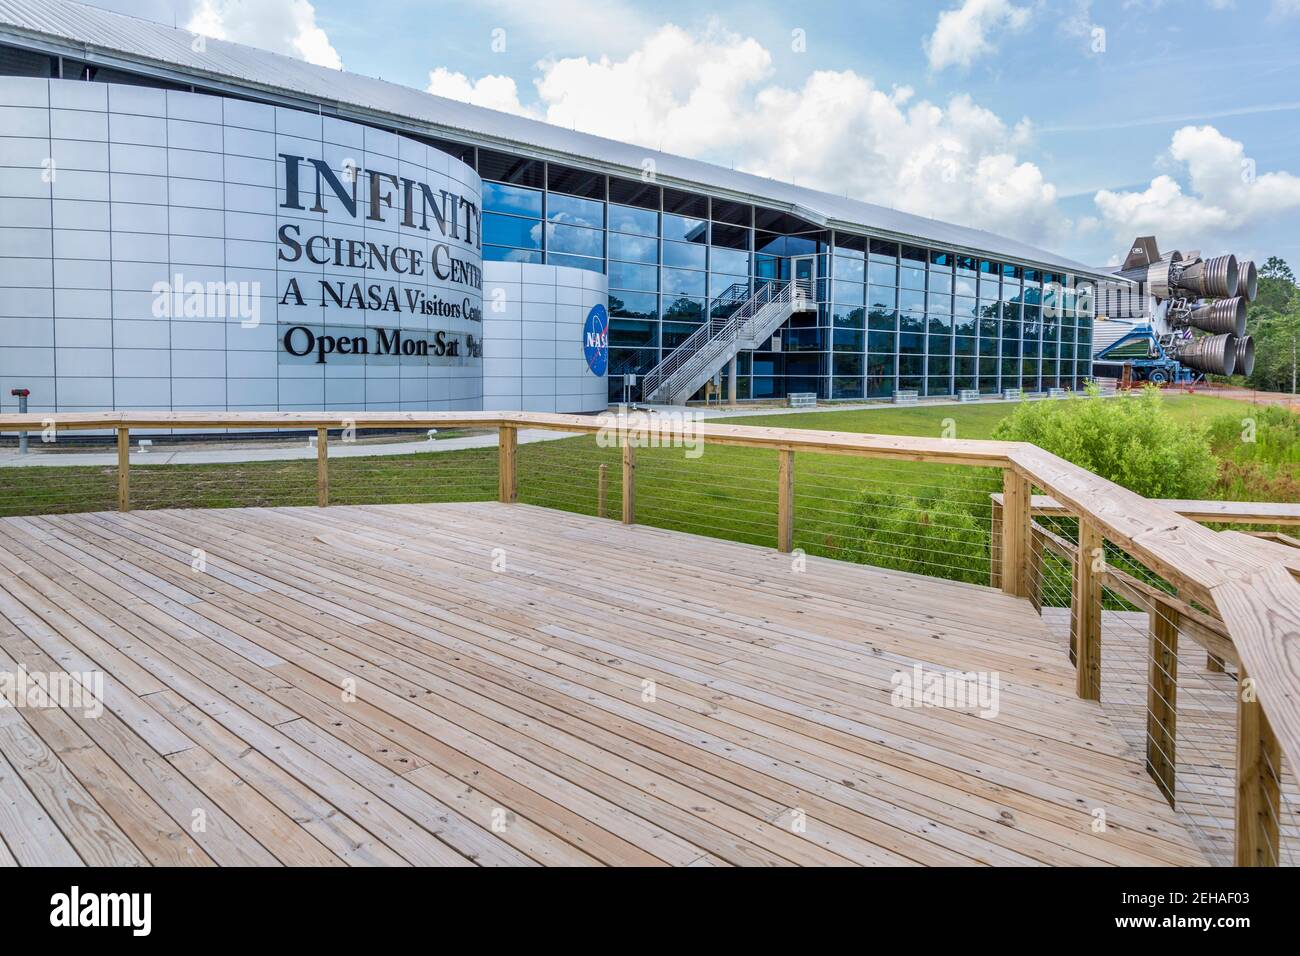 Infinity Science Center visitor center at the John C. Stennis Space Center, in Hanock County Mississppi Stock Photo